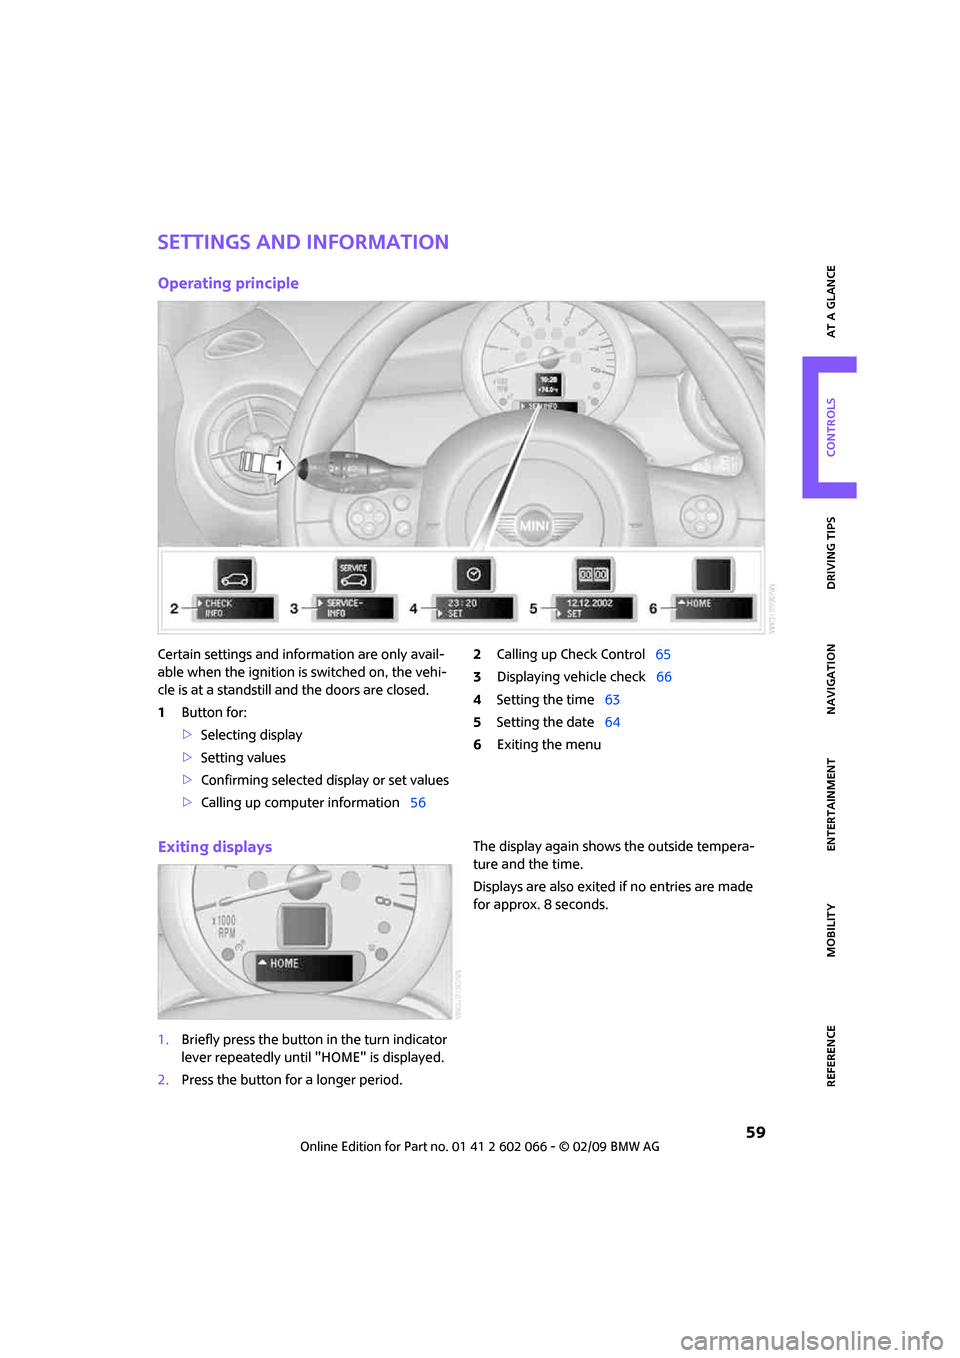 MINI Clubman 2009   (Mini Connected) Repair Manual MOBILITYAT A GLANCE CONTROLS DRIVING TIPS ENTERTAINMENT
 59
NAVIGATION REFERENCE
Settings and information
Operating principle
Certain settings and information are only avail-
able when the ignition is